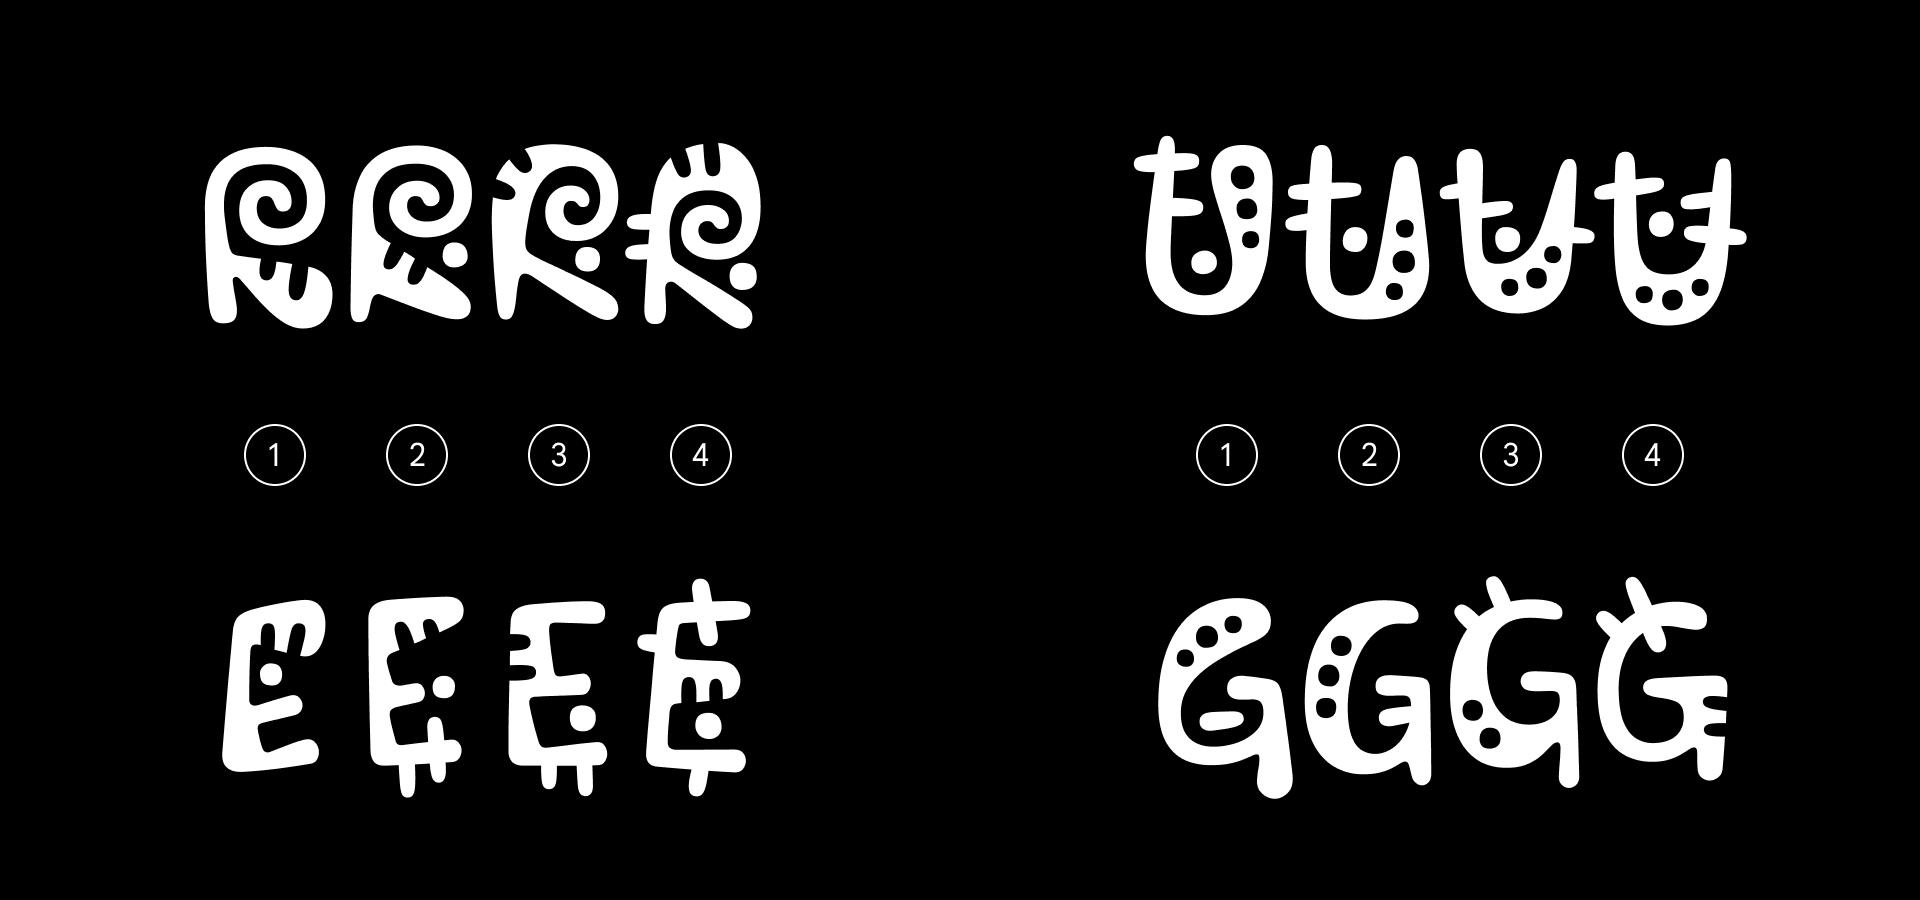 Comparison of four letters in four Kablammo styles